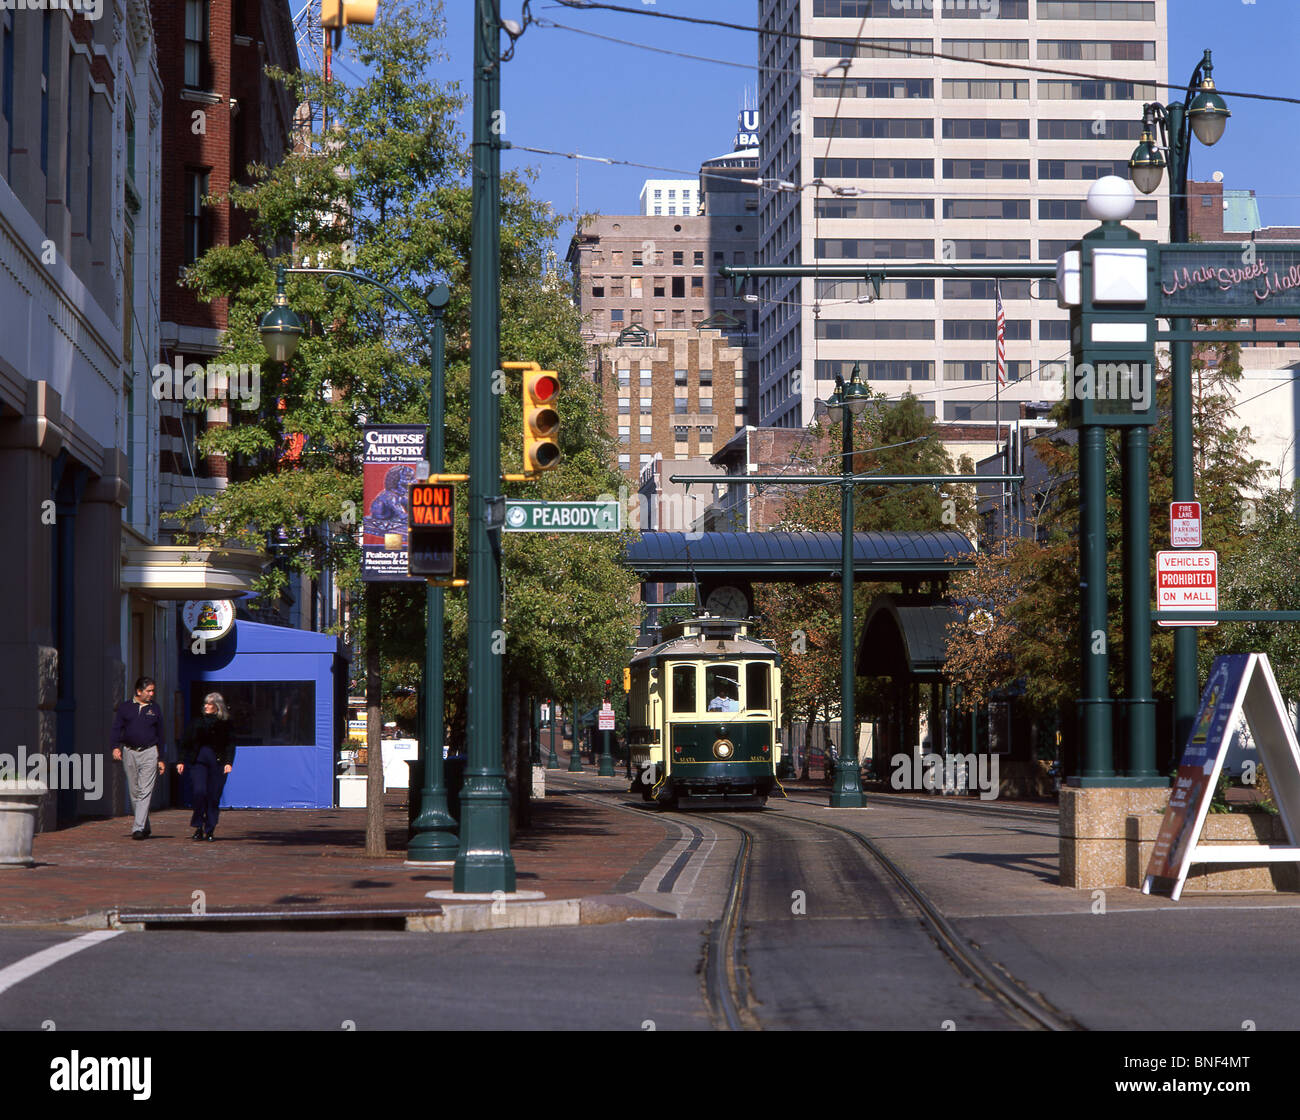 Trolley car on Main Street, Memphis, Tennessee, United States of America Stock Photo